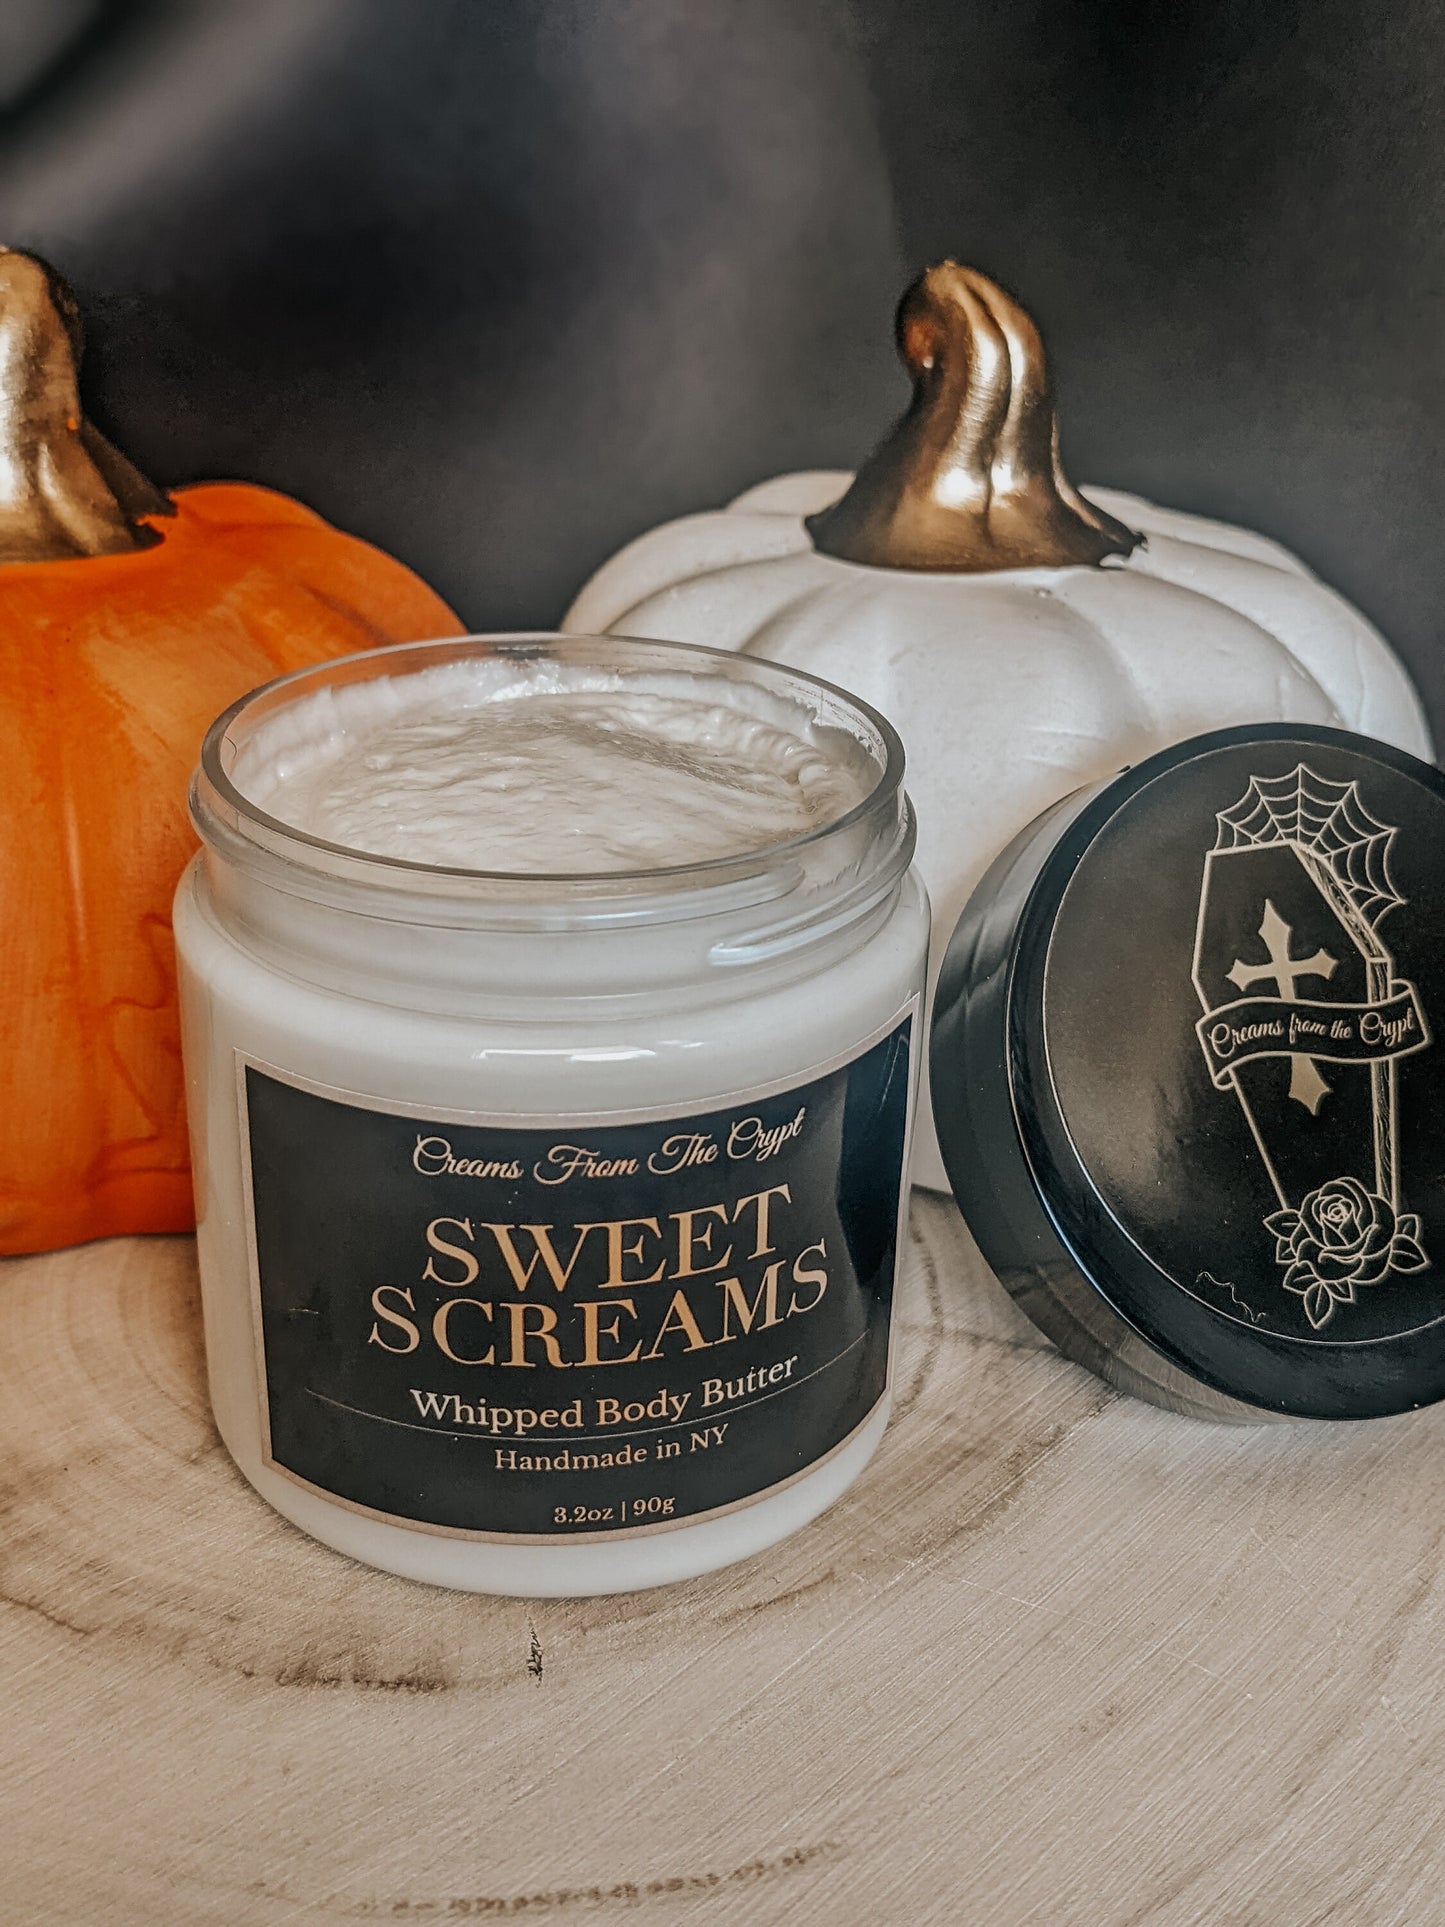 SWEET SCREAMS - Pumpkin Cheesecake scented, Vegan whipped body butter, Shea, mango butter, moisturizer, gothic skincare, fall/food fragrance